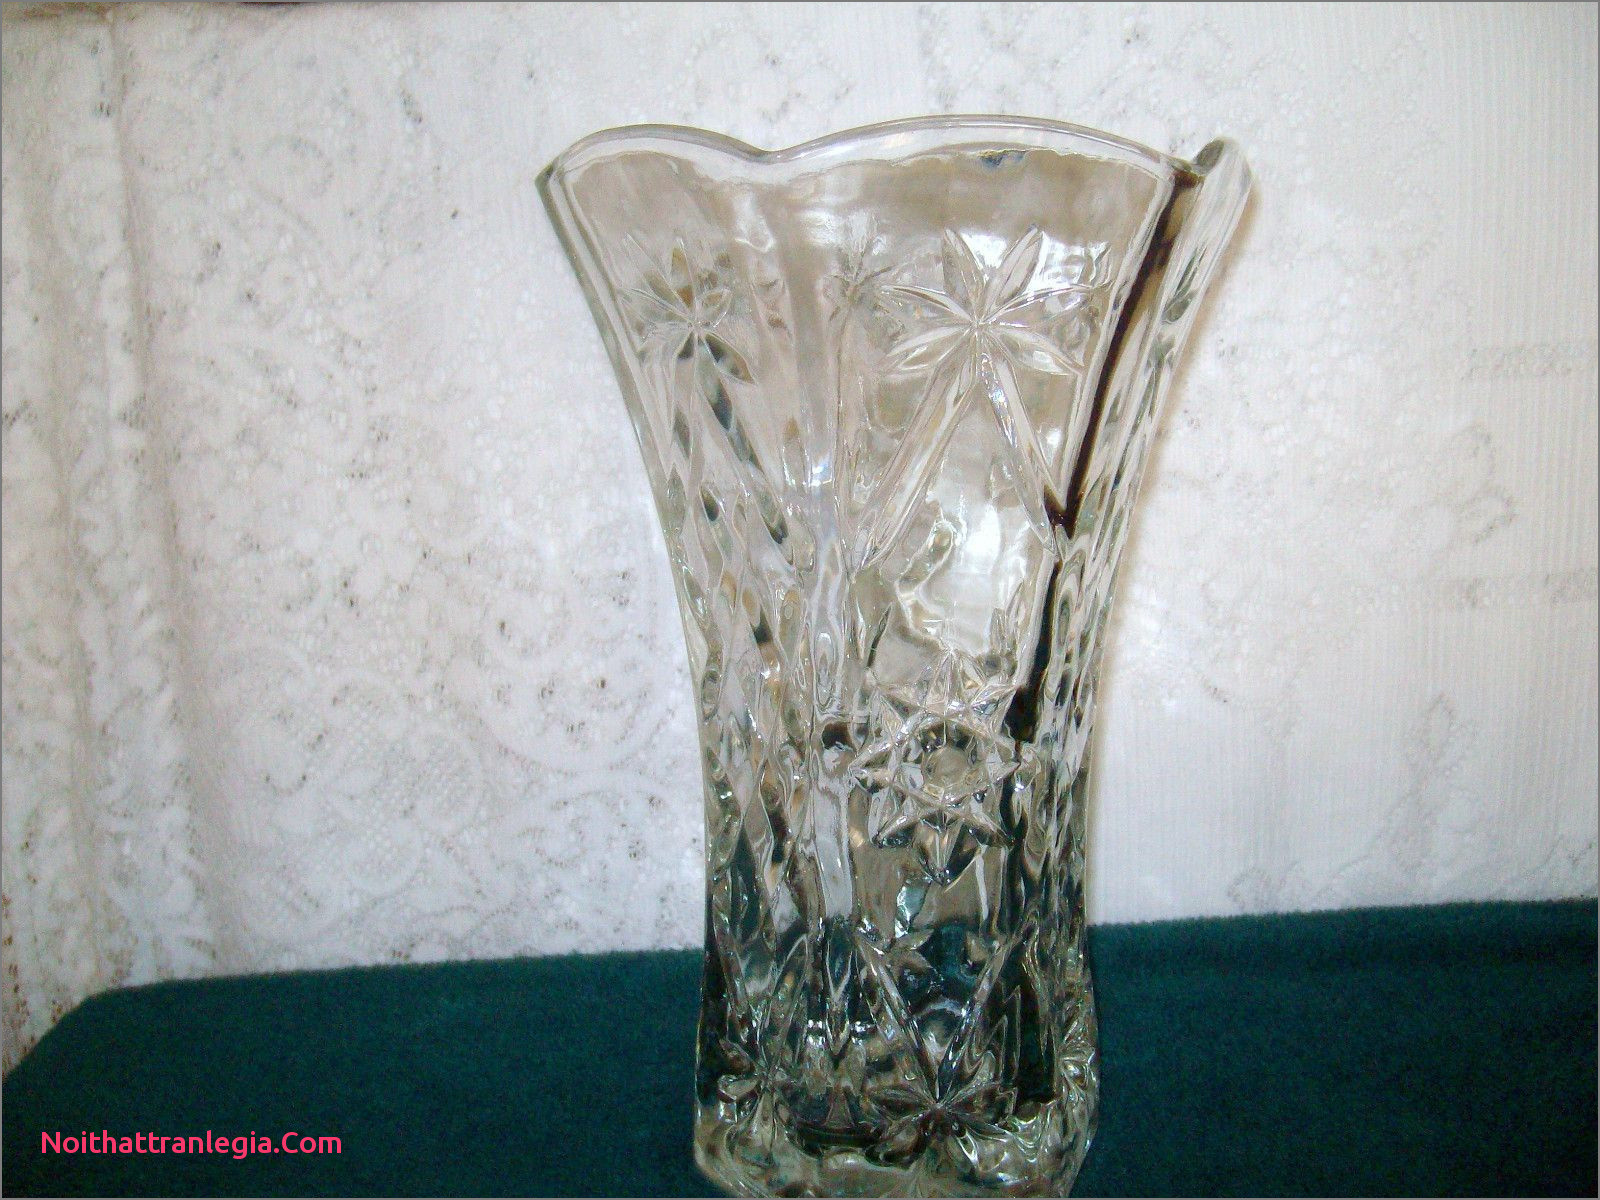 23 Stunning Leaded Glass Vase 2024 free download leaded glass vase of 20 cut glass antique vase noithattranlegia vases design within vintage heavy depression cut glass vase 10 1 2 tall ruffled edges